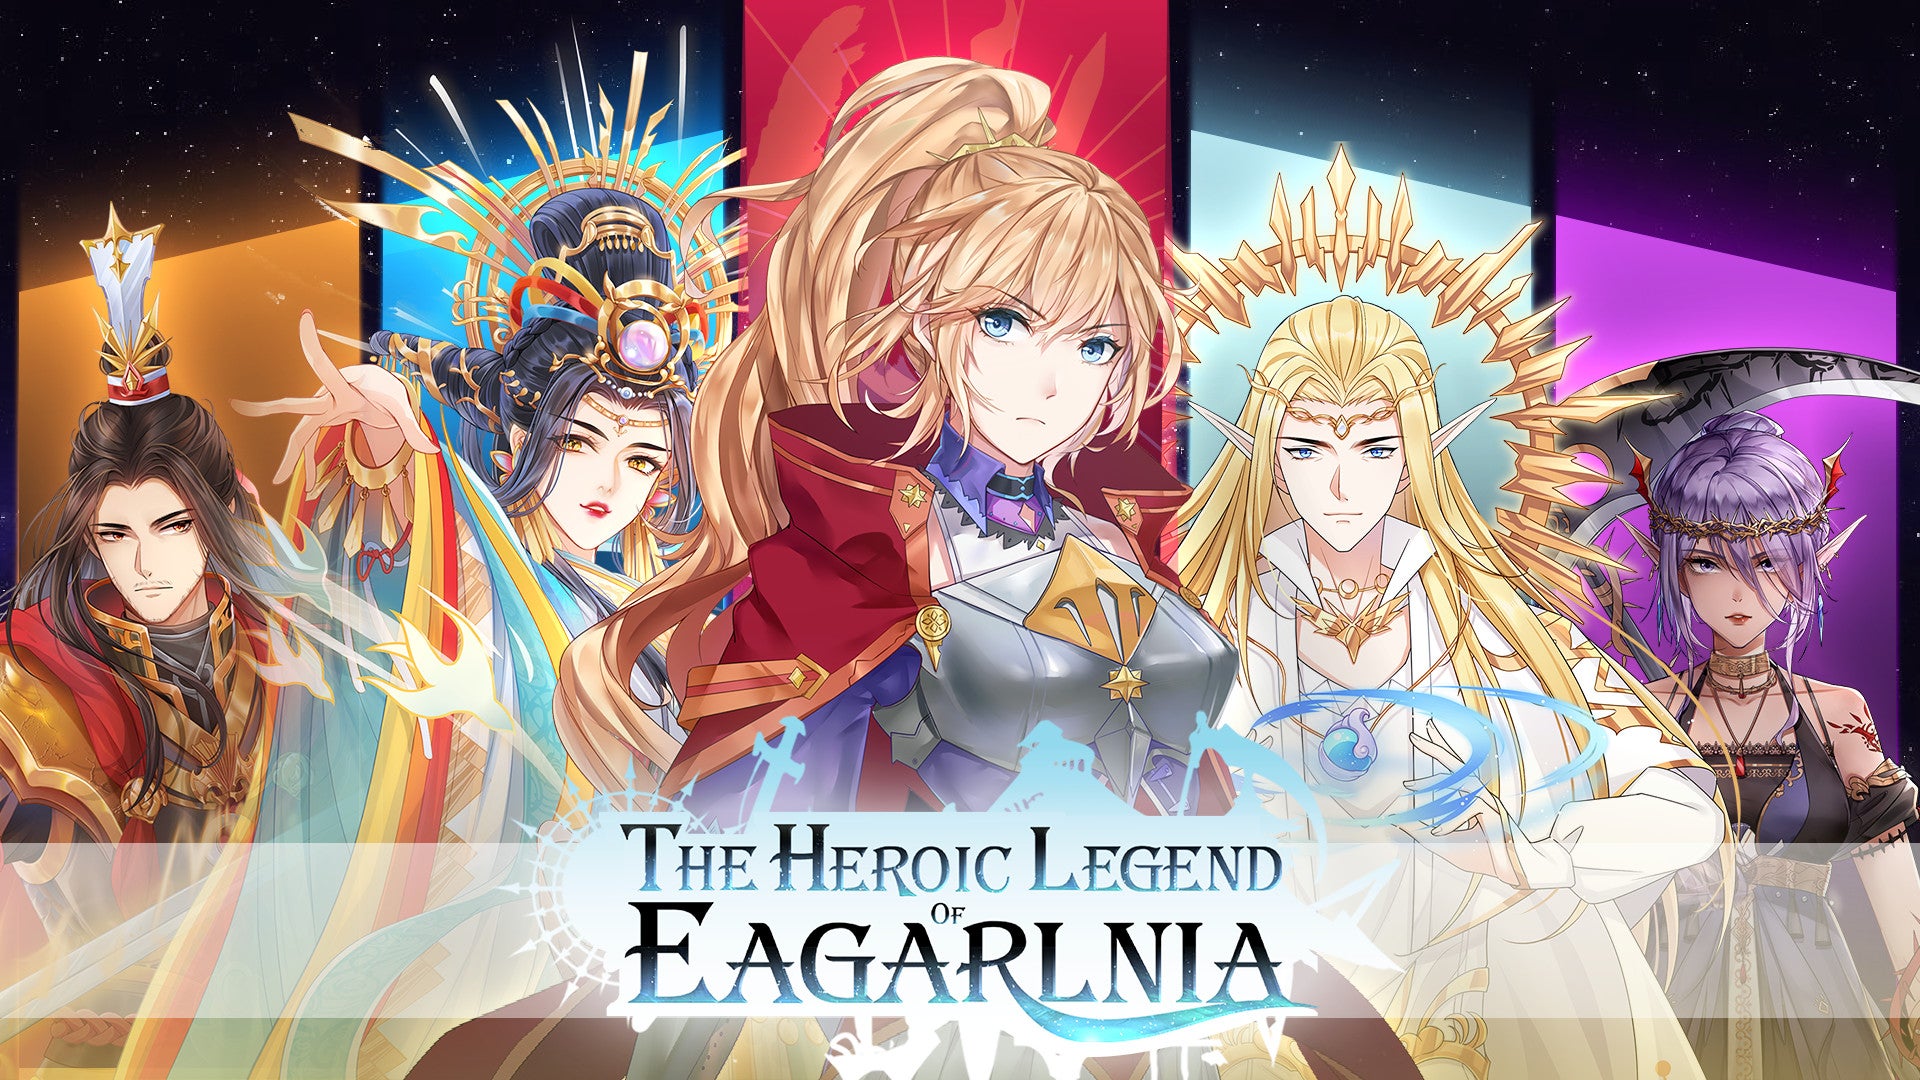 Image for The Rally Point: The Heroic Legend Of Eagarlnia is a sort of light grand strategy, somehow